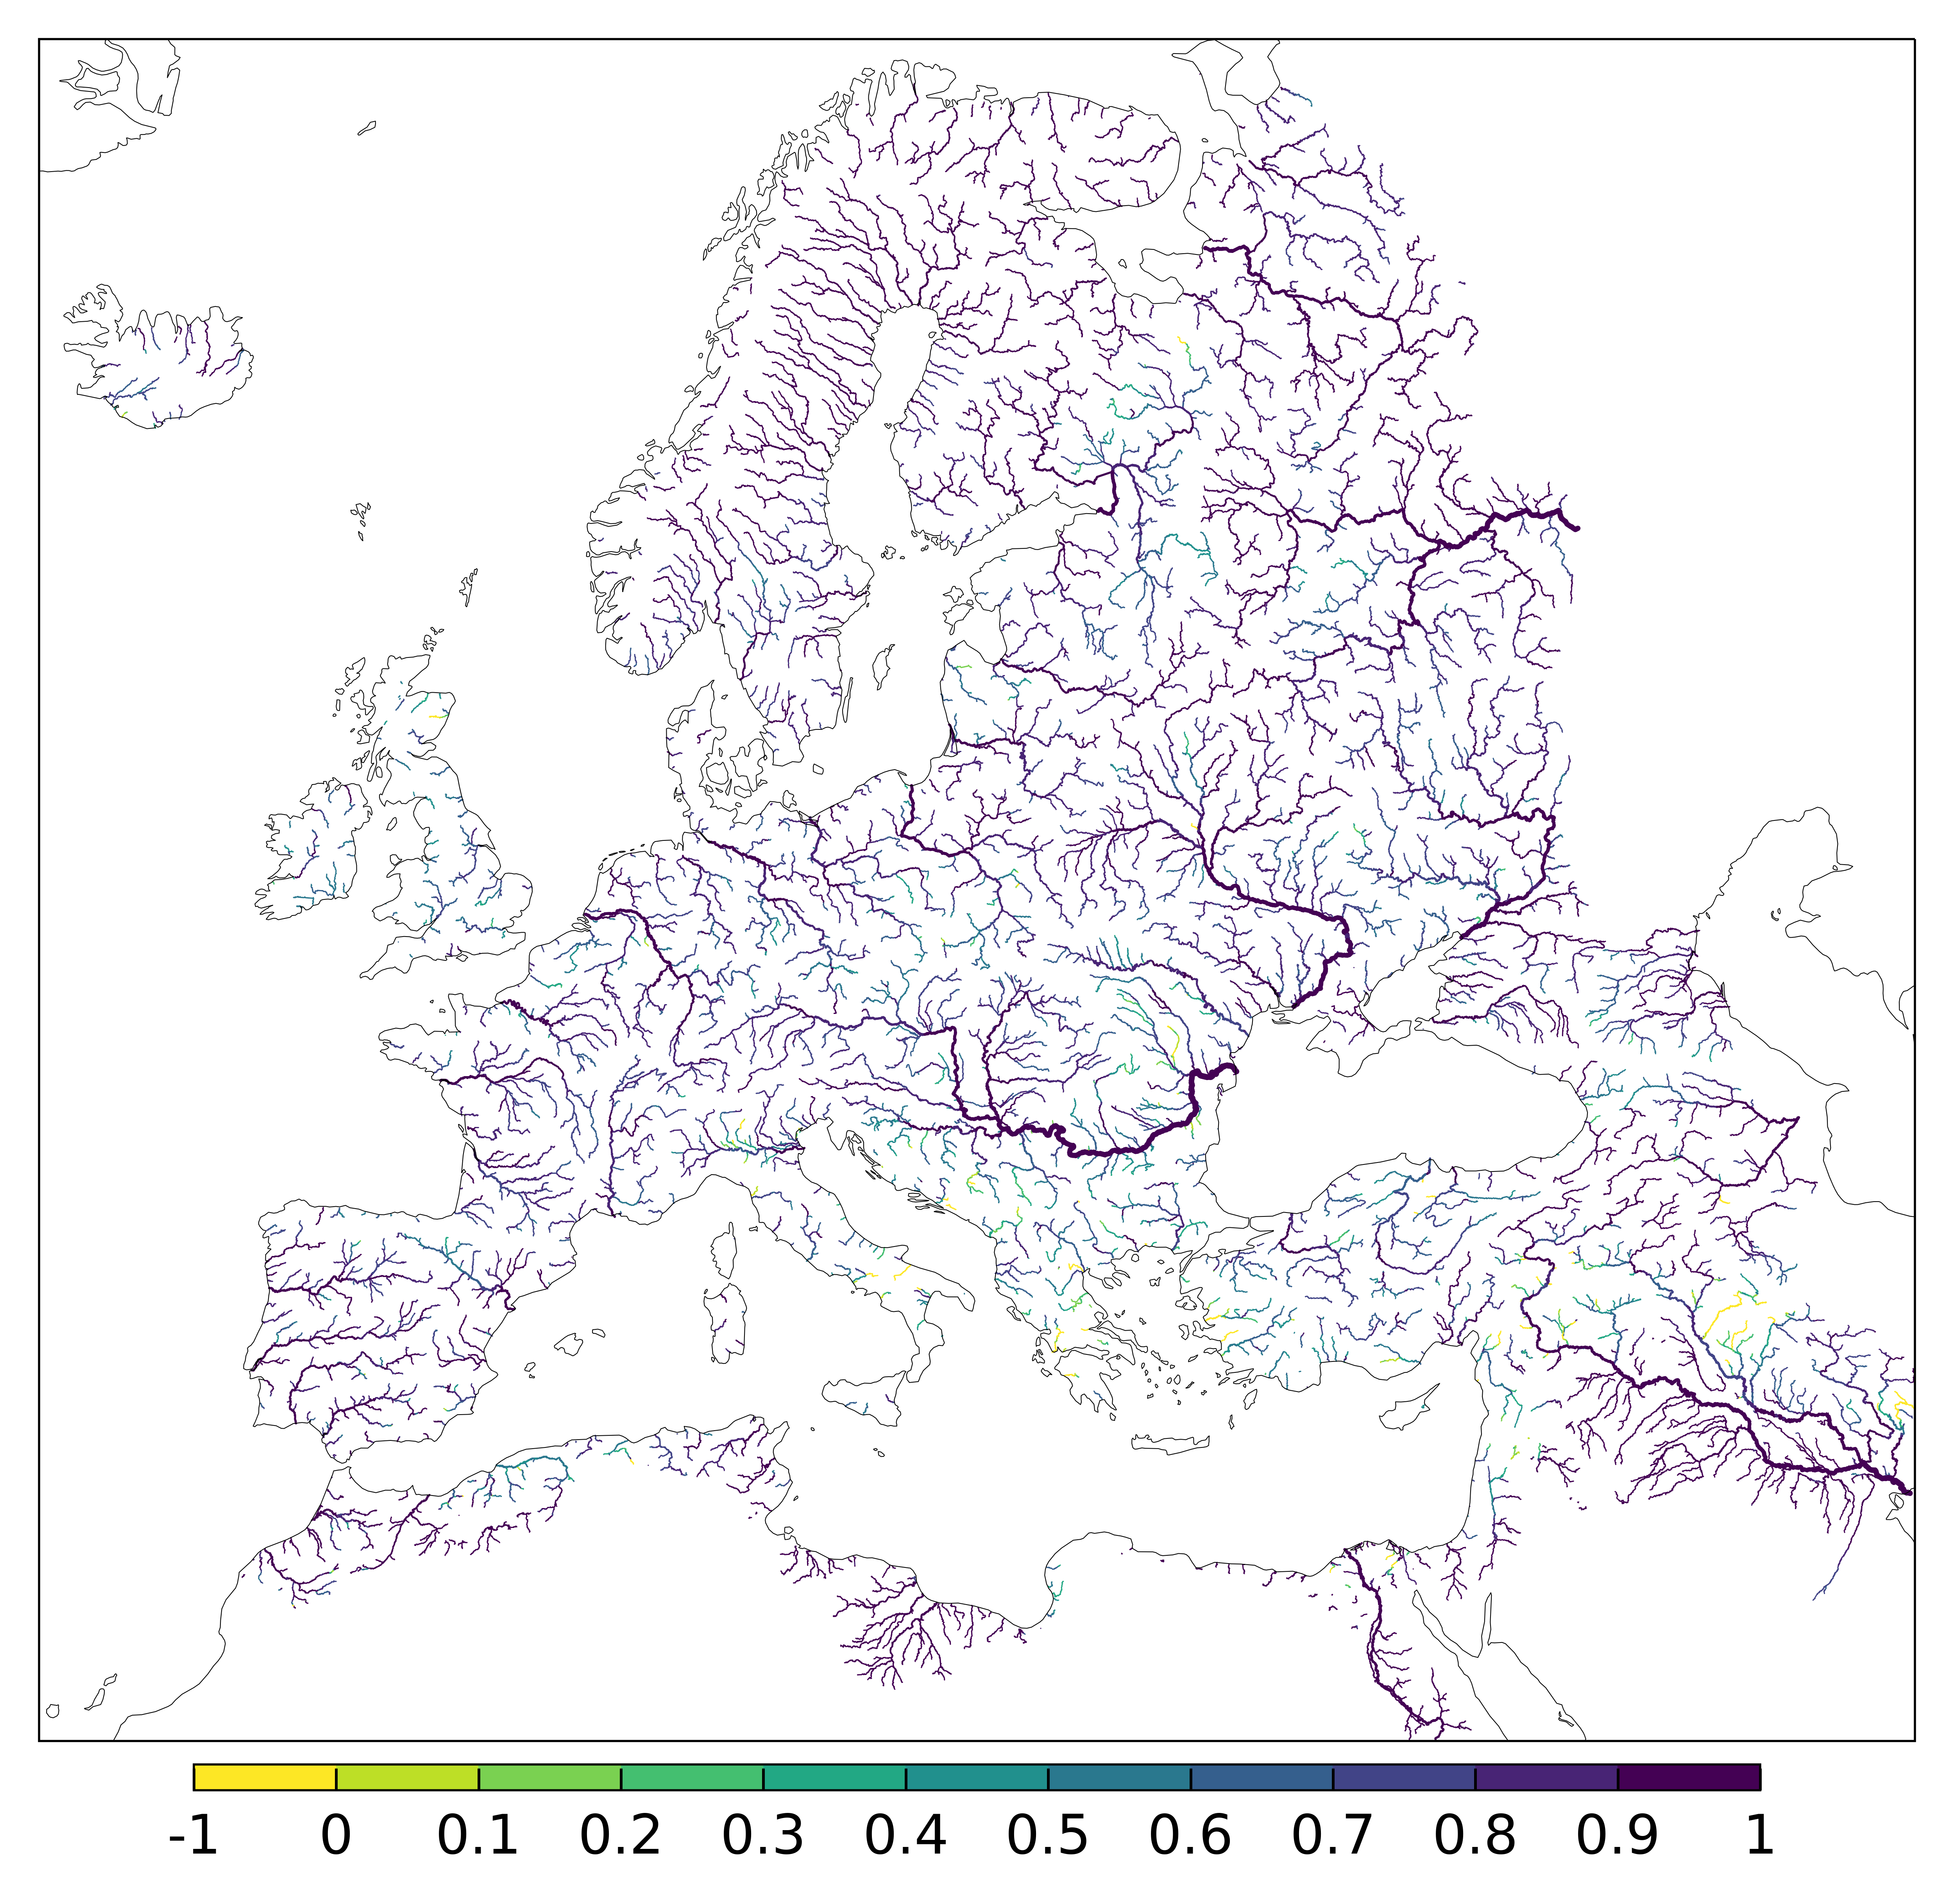 Figure 1. EFAS CRPSS at lead-time 1 day for November 2023 across the EFAS domain for catchments larger than 1000km2. Climatology is used as the reference forecast.